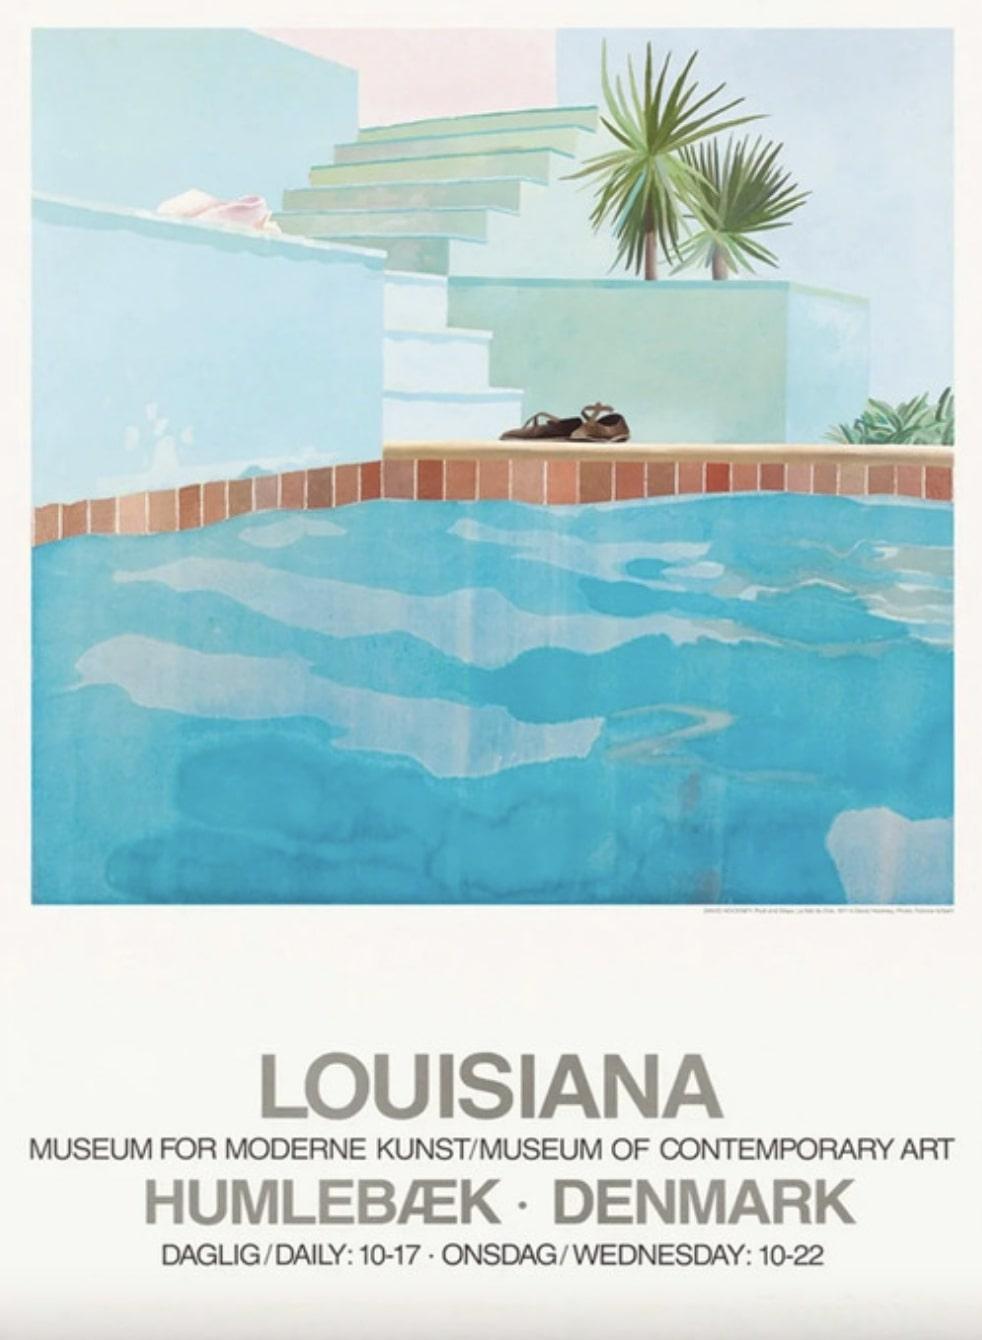 Offset lithograph.
A vintage exhibition poster - this is not a later reproduction.